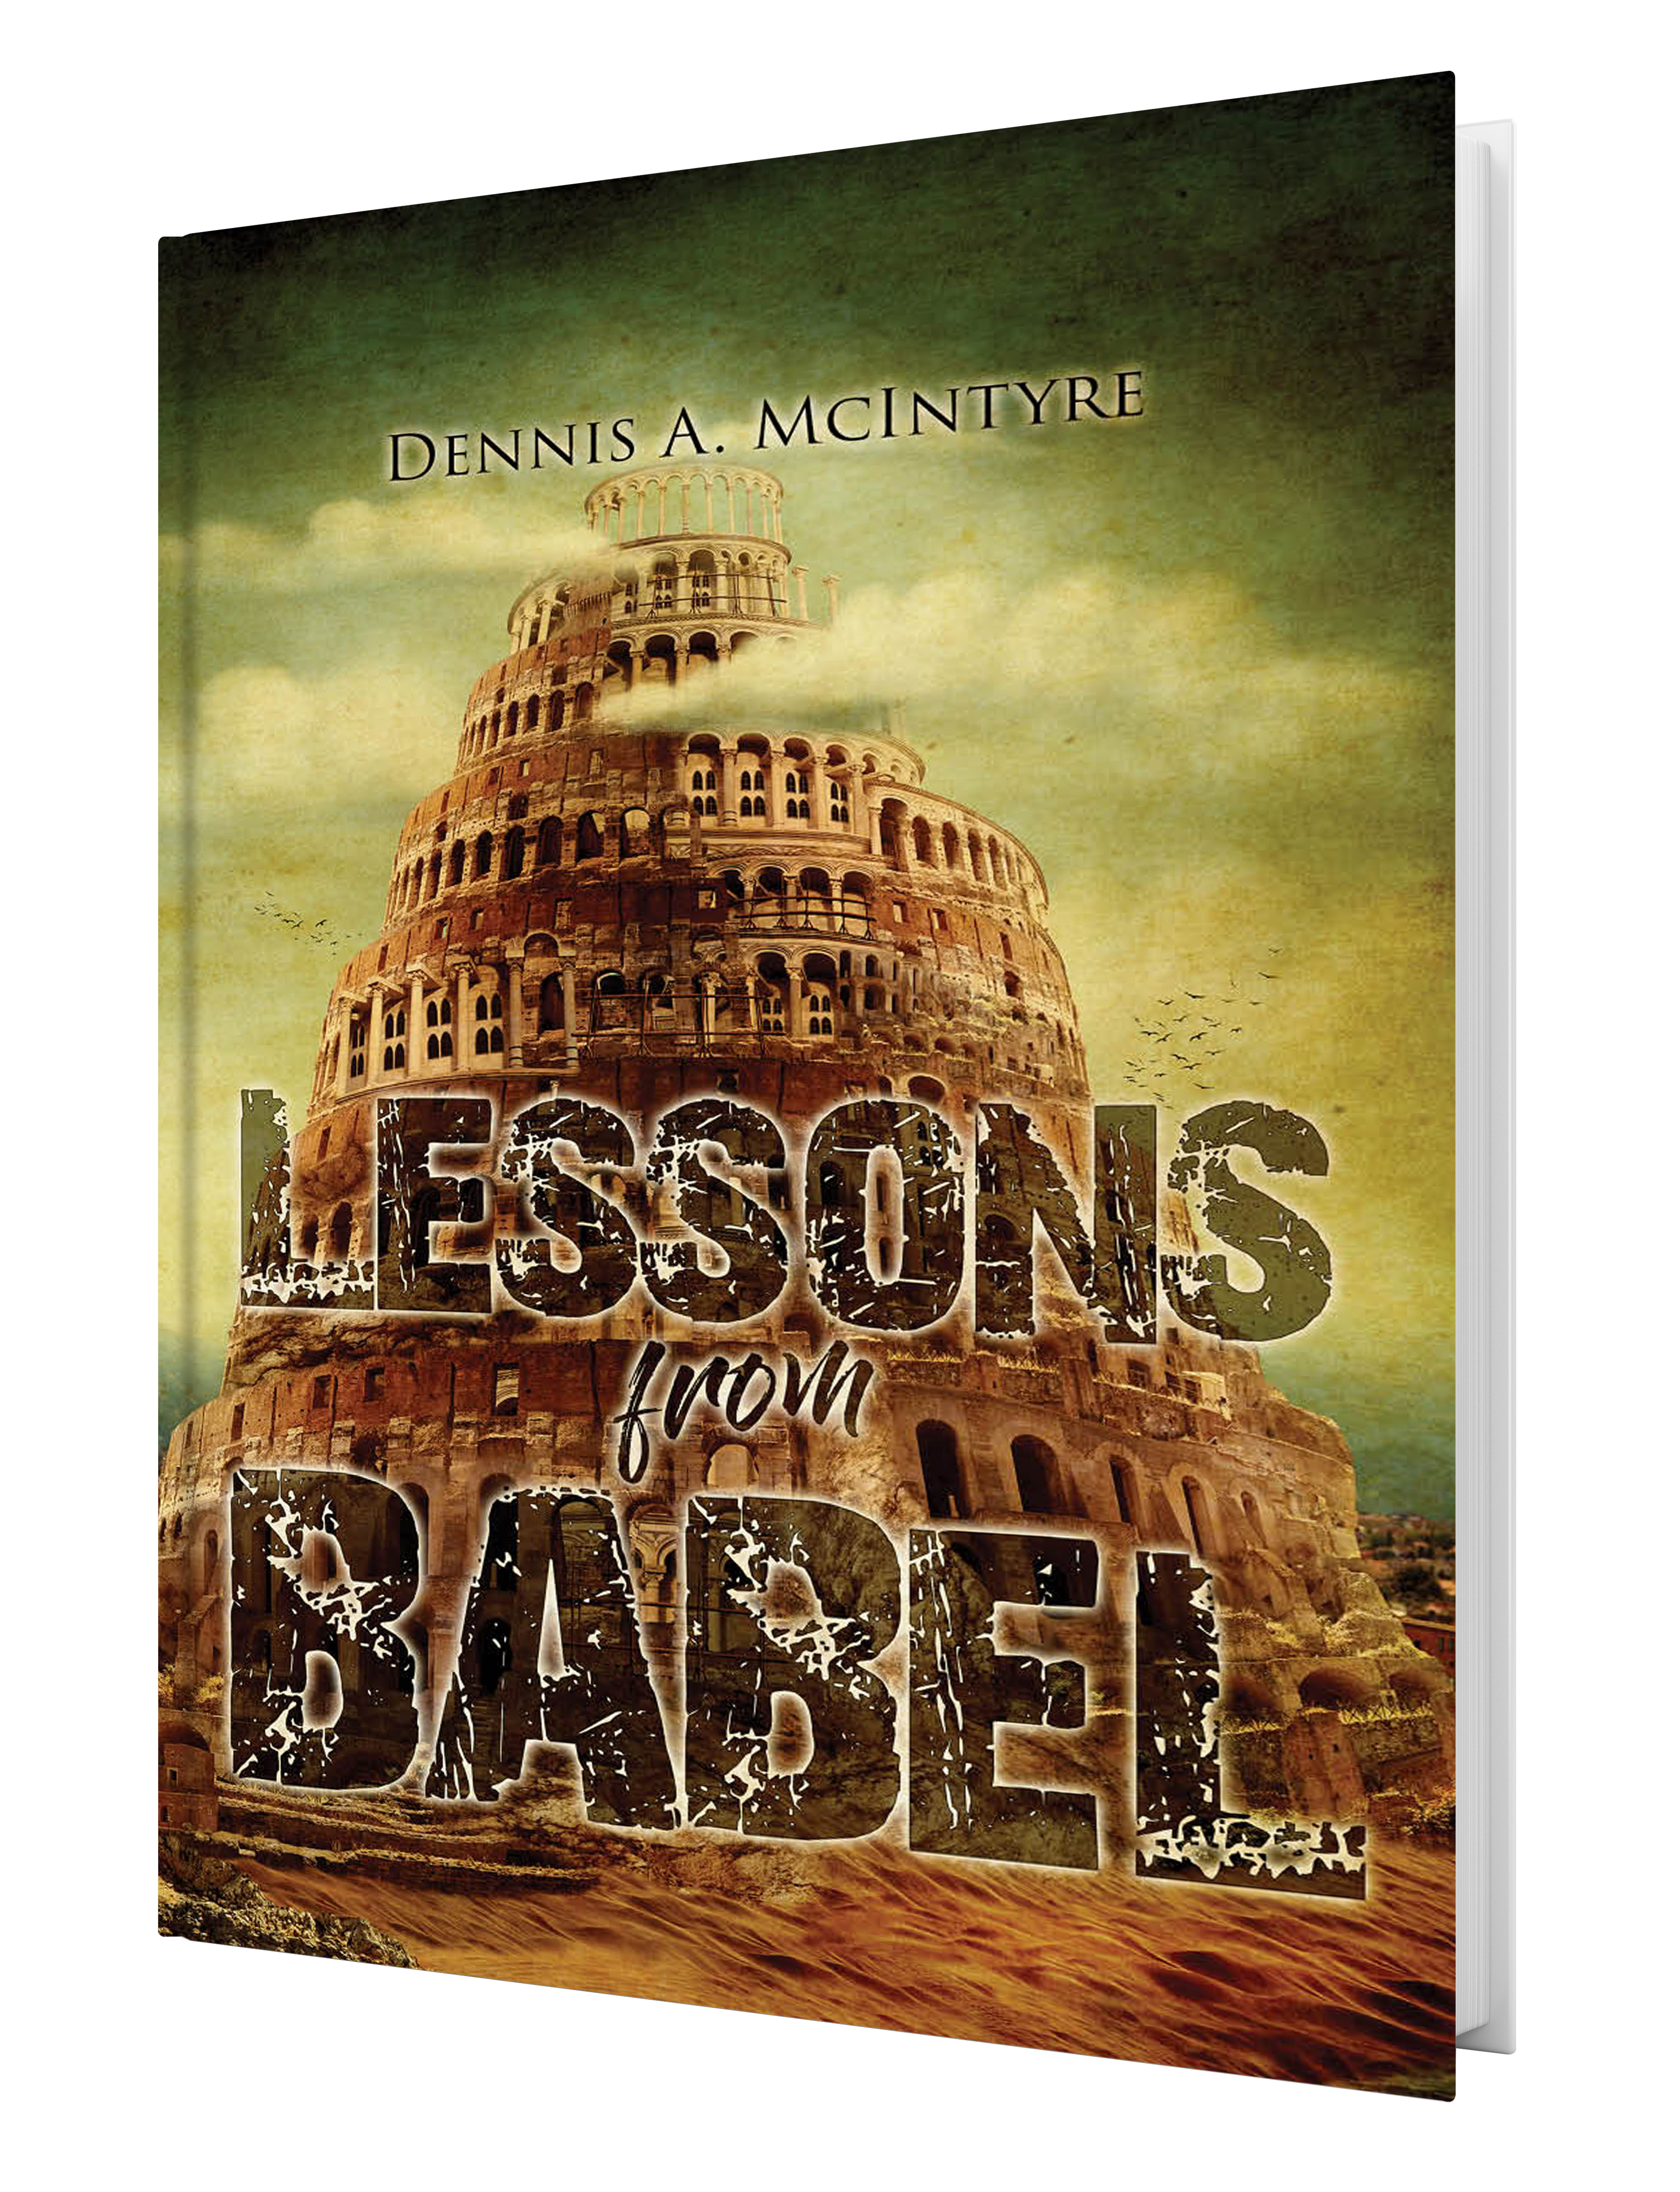 Lessons from Babel